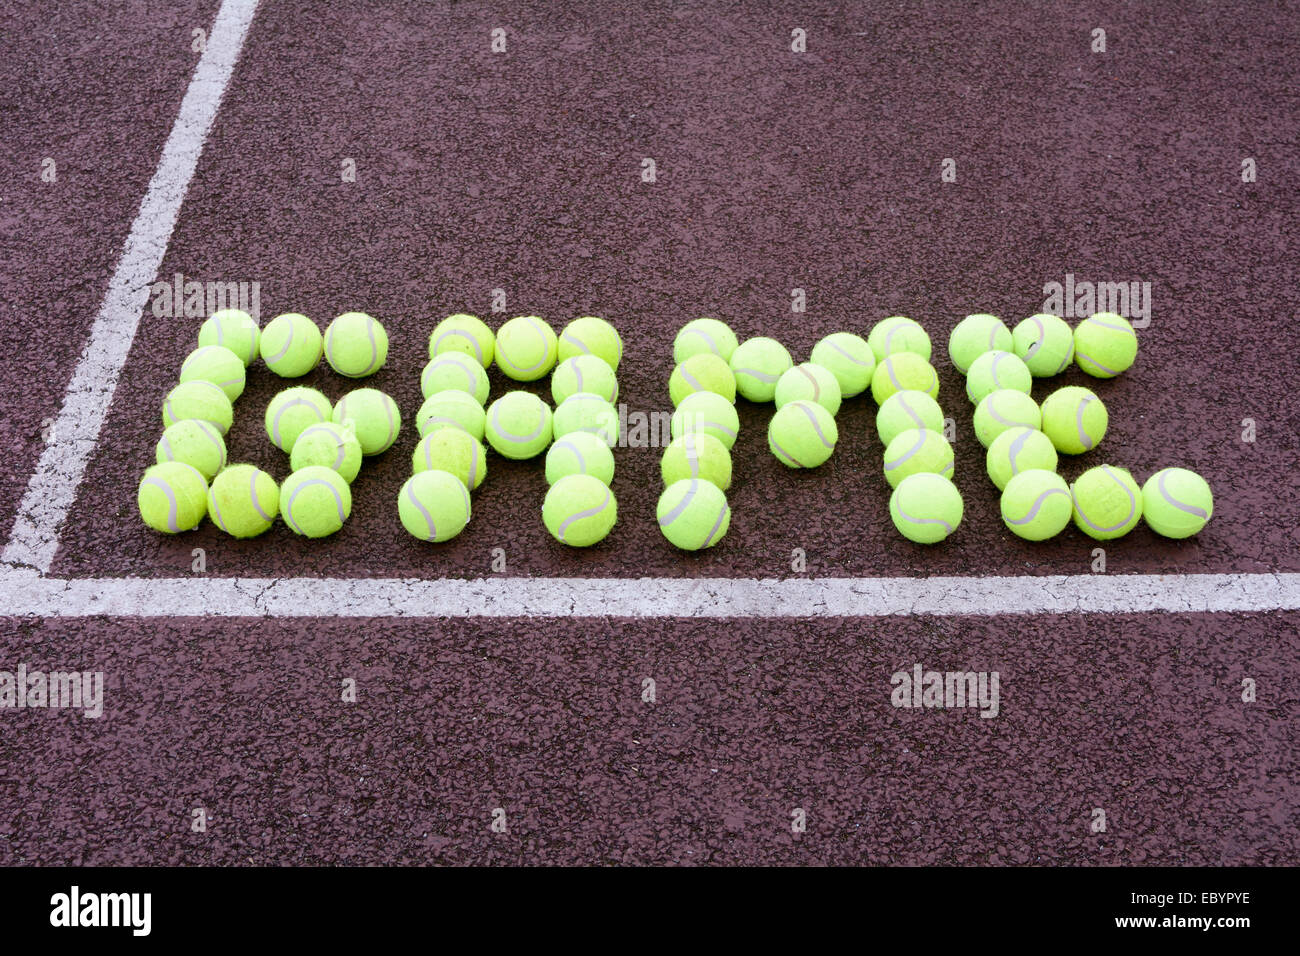 Tennis game made from tennis balls on hard court Stock Photo